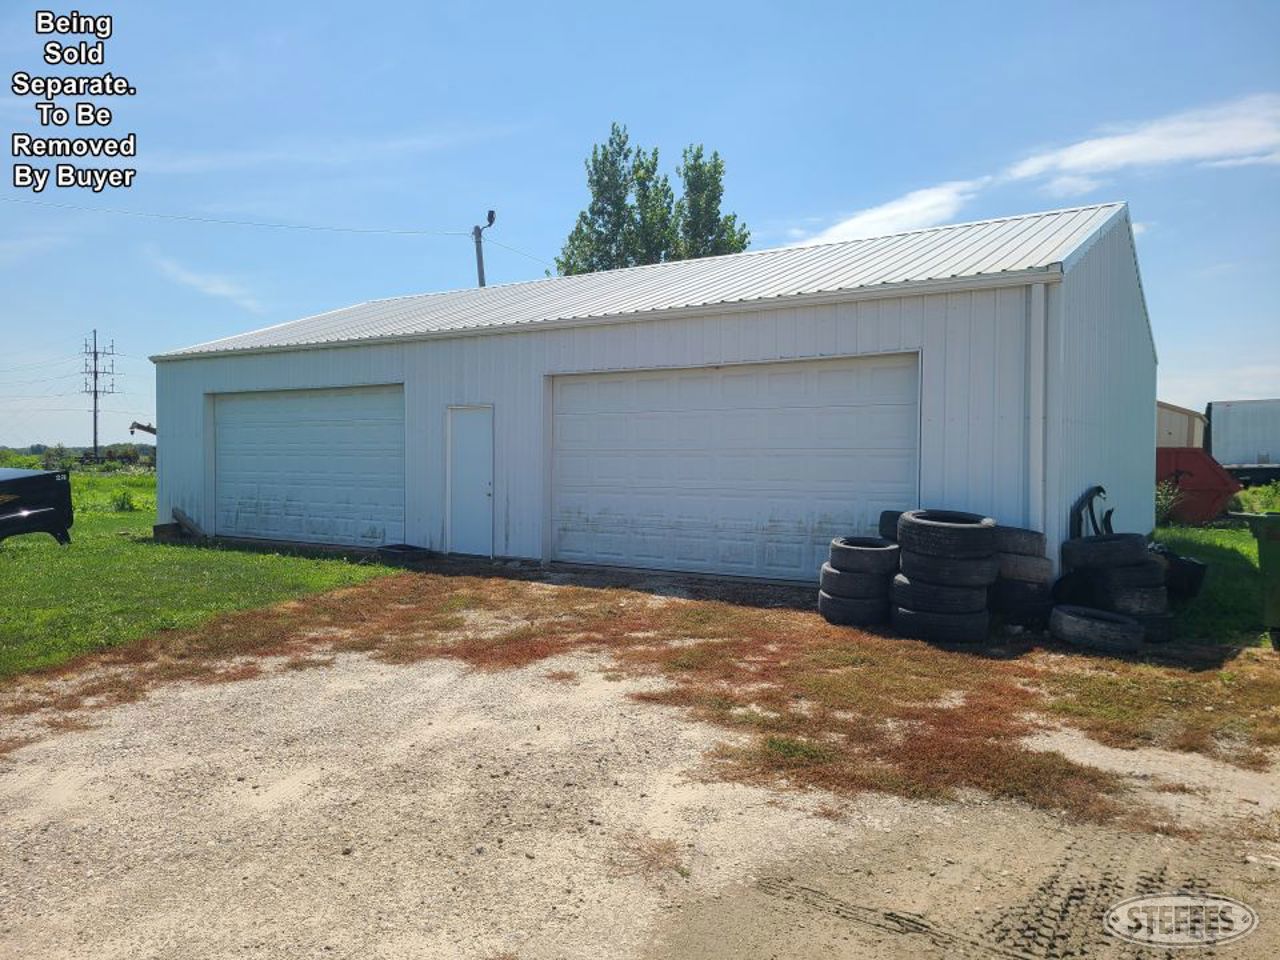 32'x48' Garage to be Removed